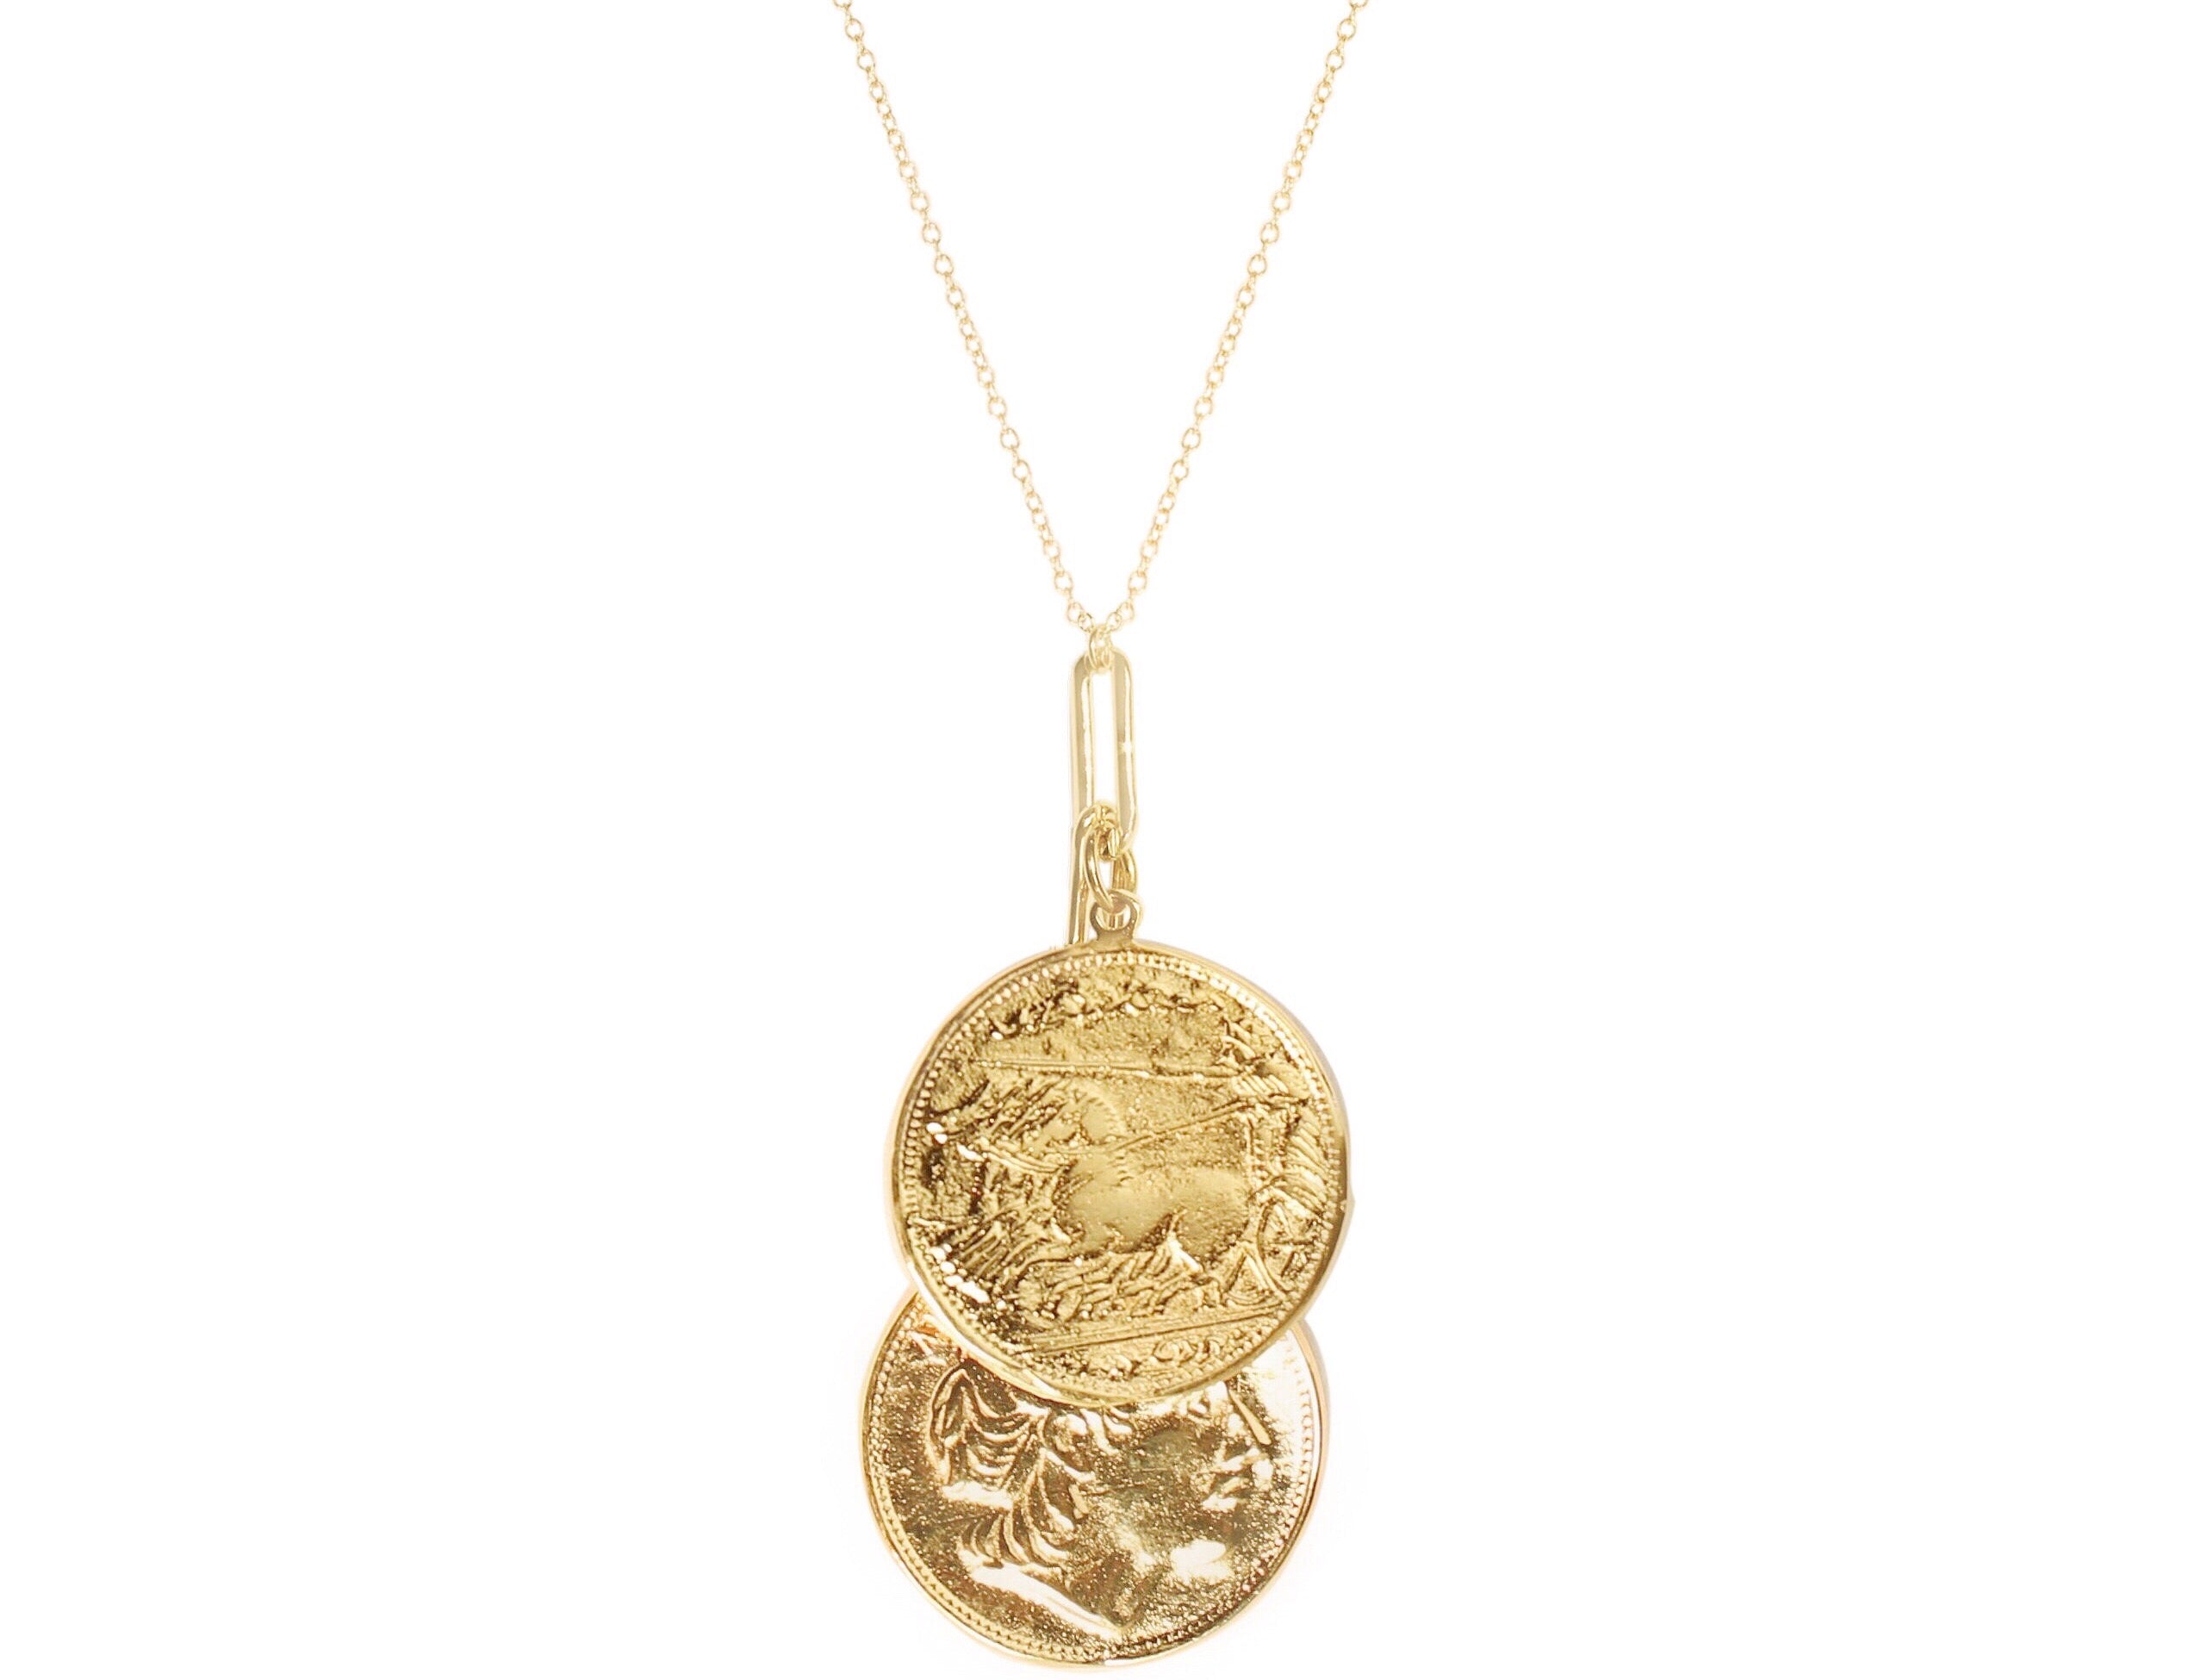 Buy American Coin Treasures Coin Necklace Pendant Double Strand Love Chain–  Genuine Seated Liberty Gold-Layered Coin | Goldtone Saturn Style Chain and  Lobster Claw Clasp | Certificate of Authenticity at Amazon.in